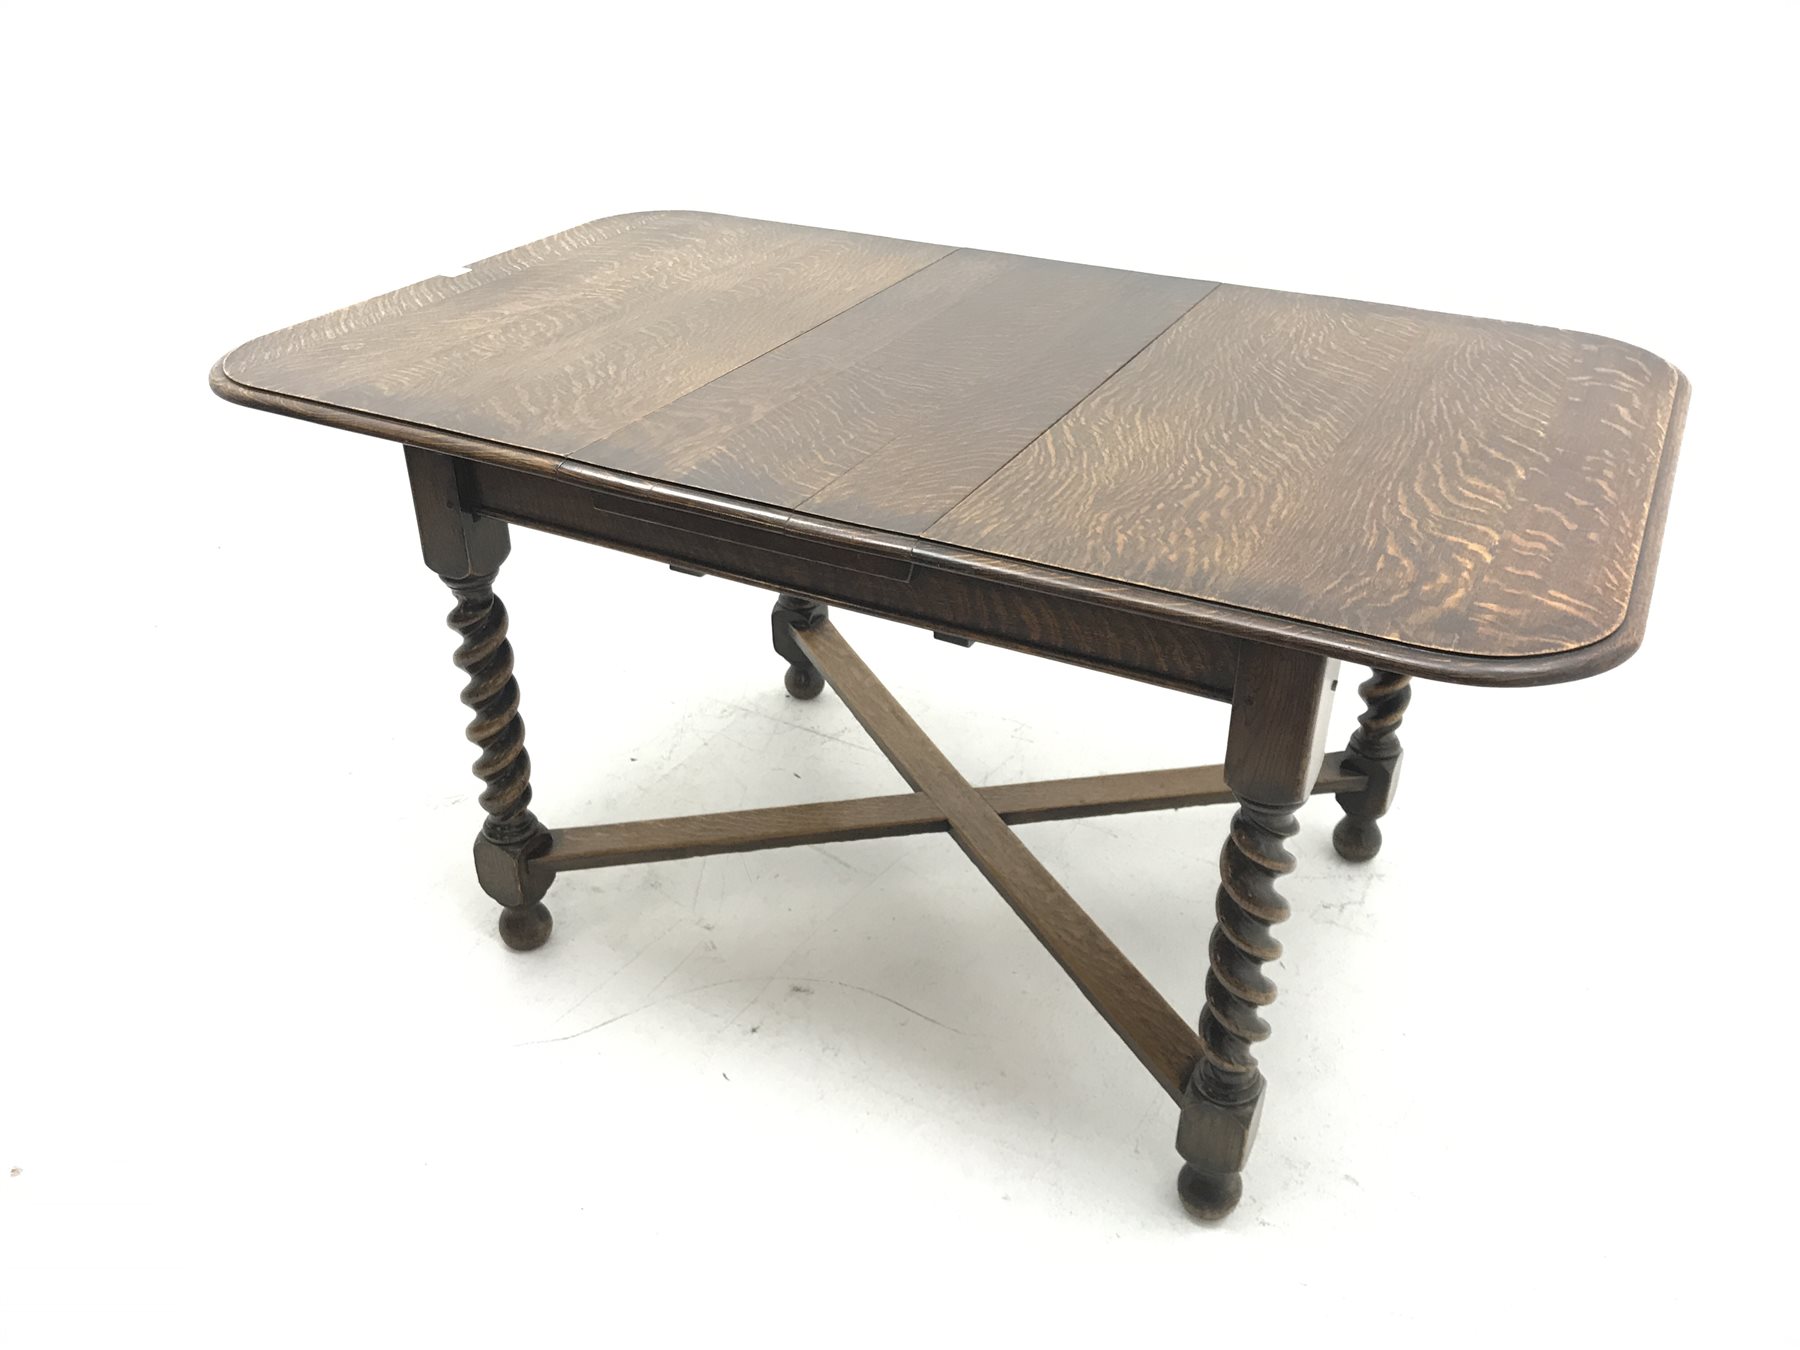 Early 20th century oak barley twist extending dining table with leaf, X shaped stretcher, curved end - Image 3 of 4